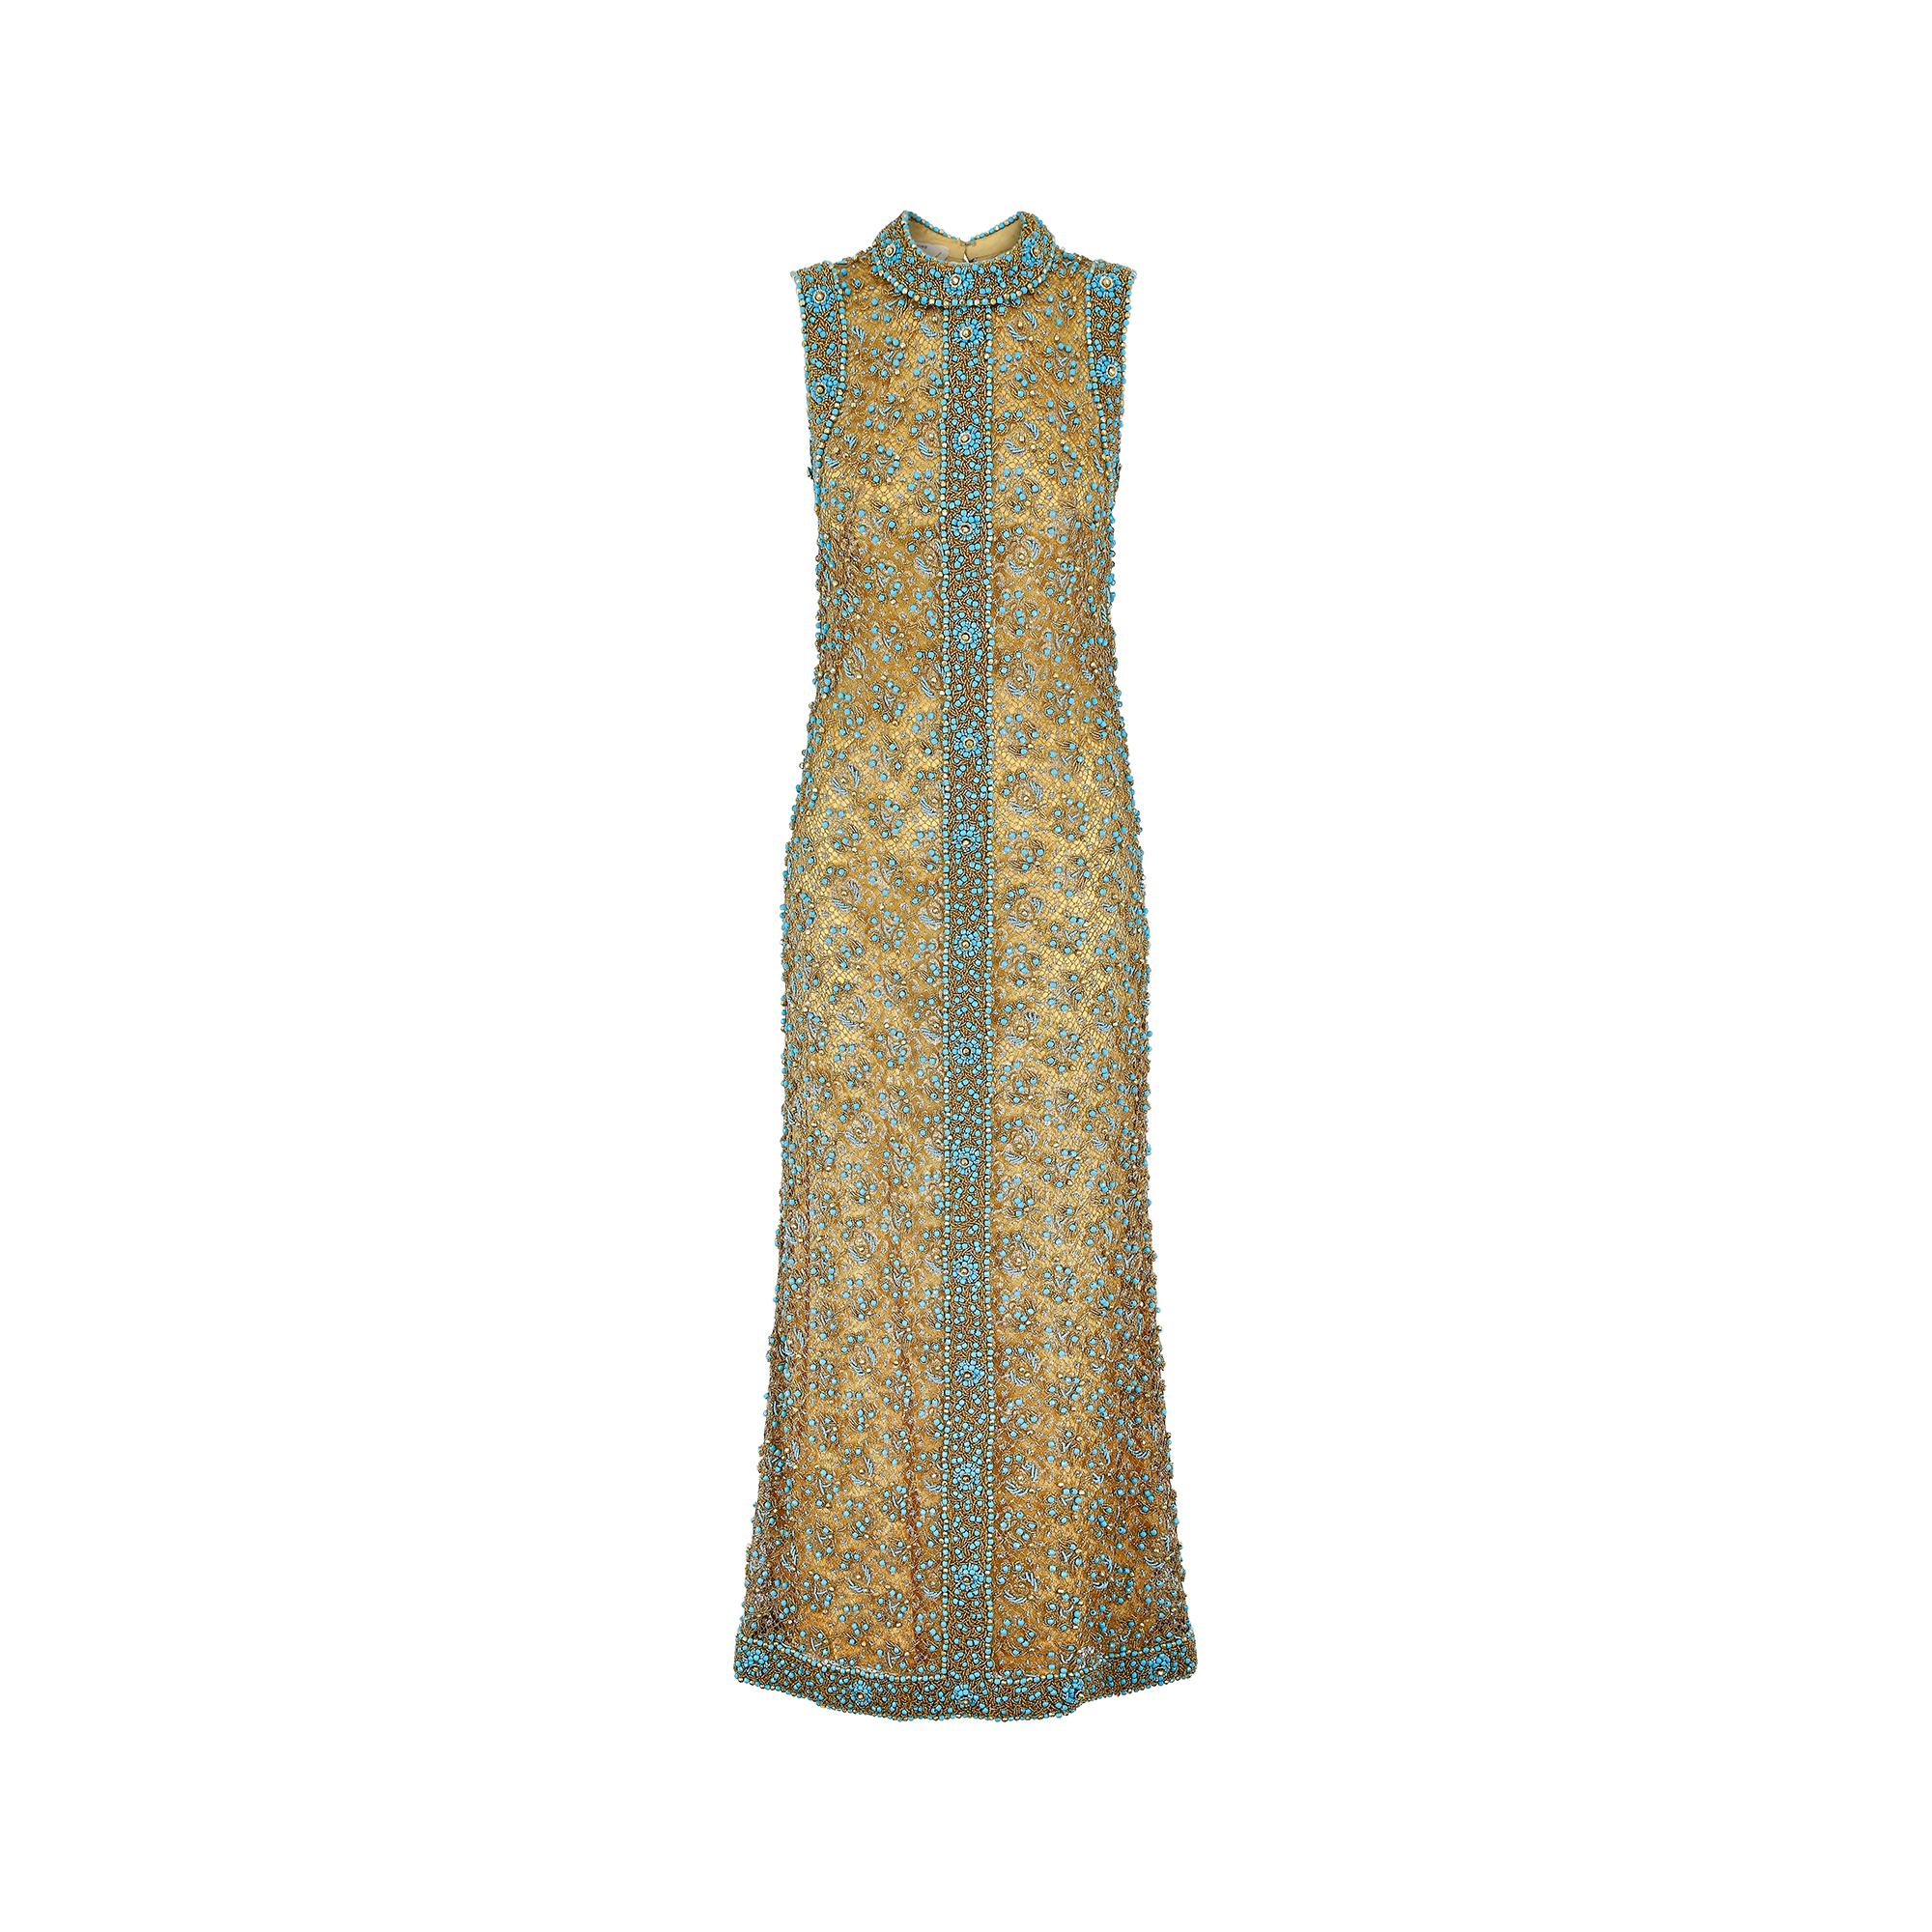 This exquisite 1960s Doreen Lok gold and turquoise dress is a perfect choice for a very special event. An absolute show-stopper and this level of intricate detail is rarely seen in such flawless vintage condition.  Full length, this gown features a